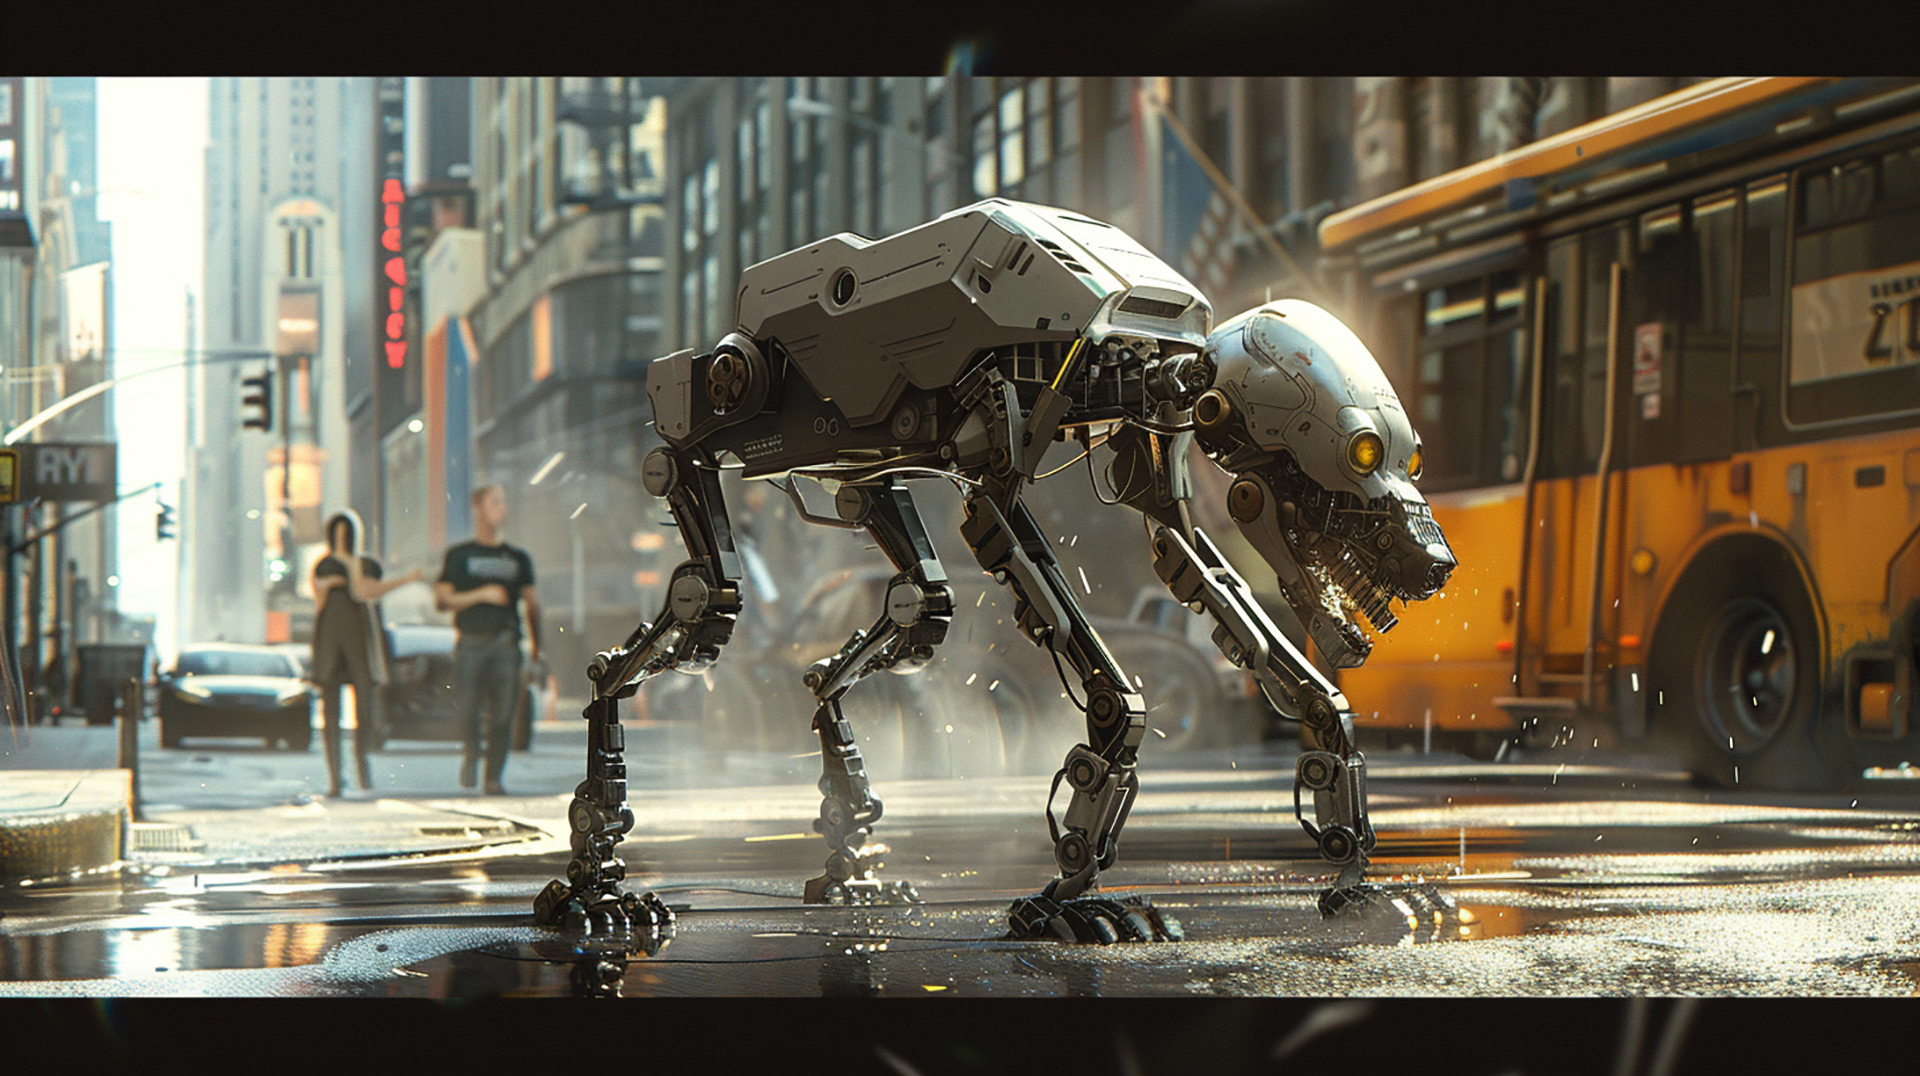 Sci-Fi Canines: Futuristic Robot Dog Images in 8K